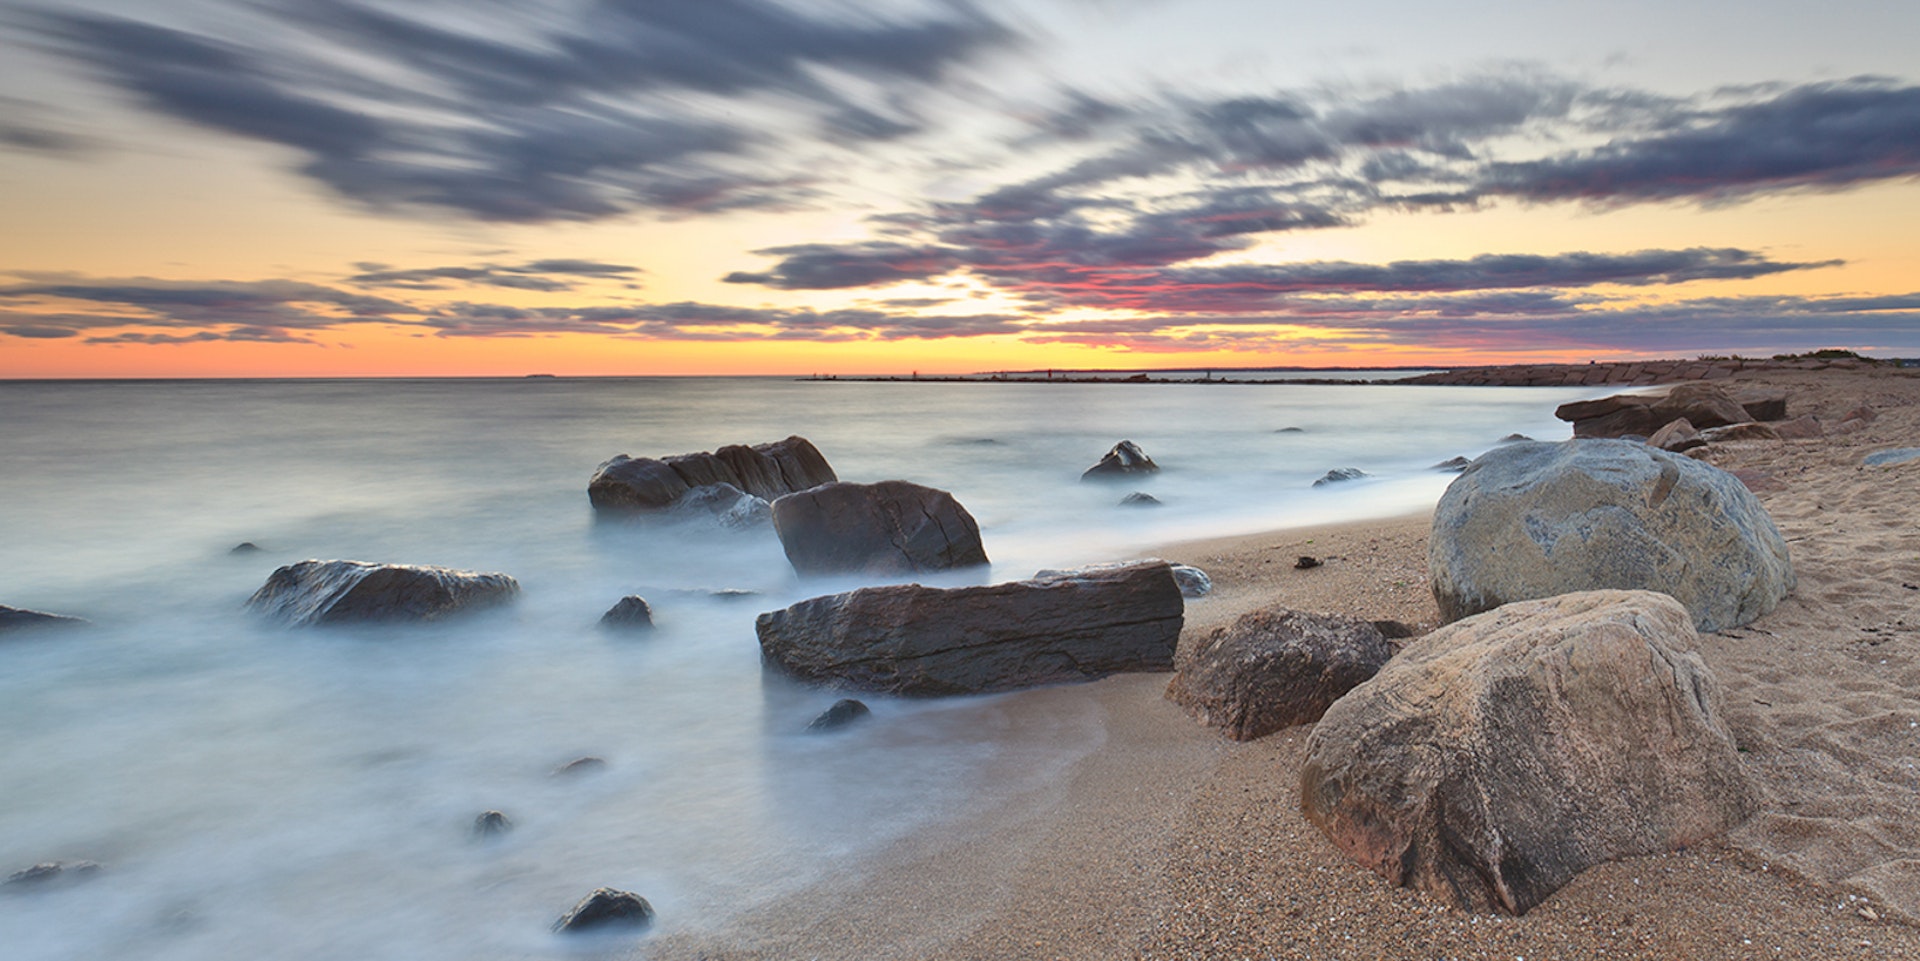 Long exposure of some rocks on a beach, with an orange sunset in the distance; summer weekend trips from New York City